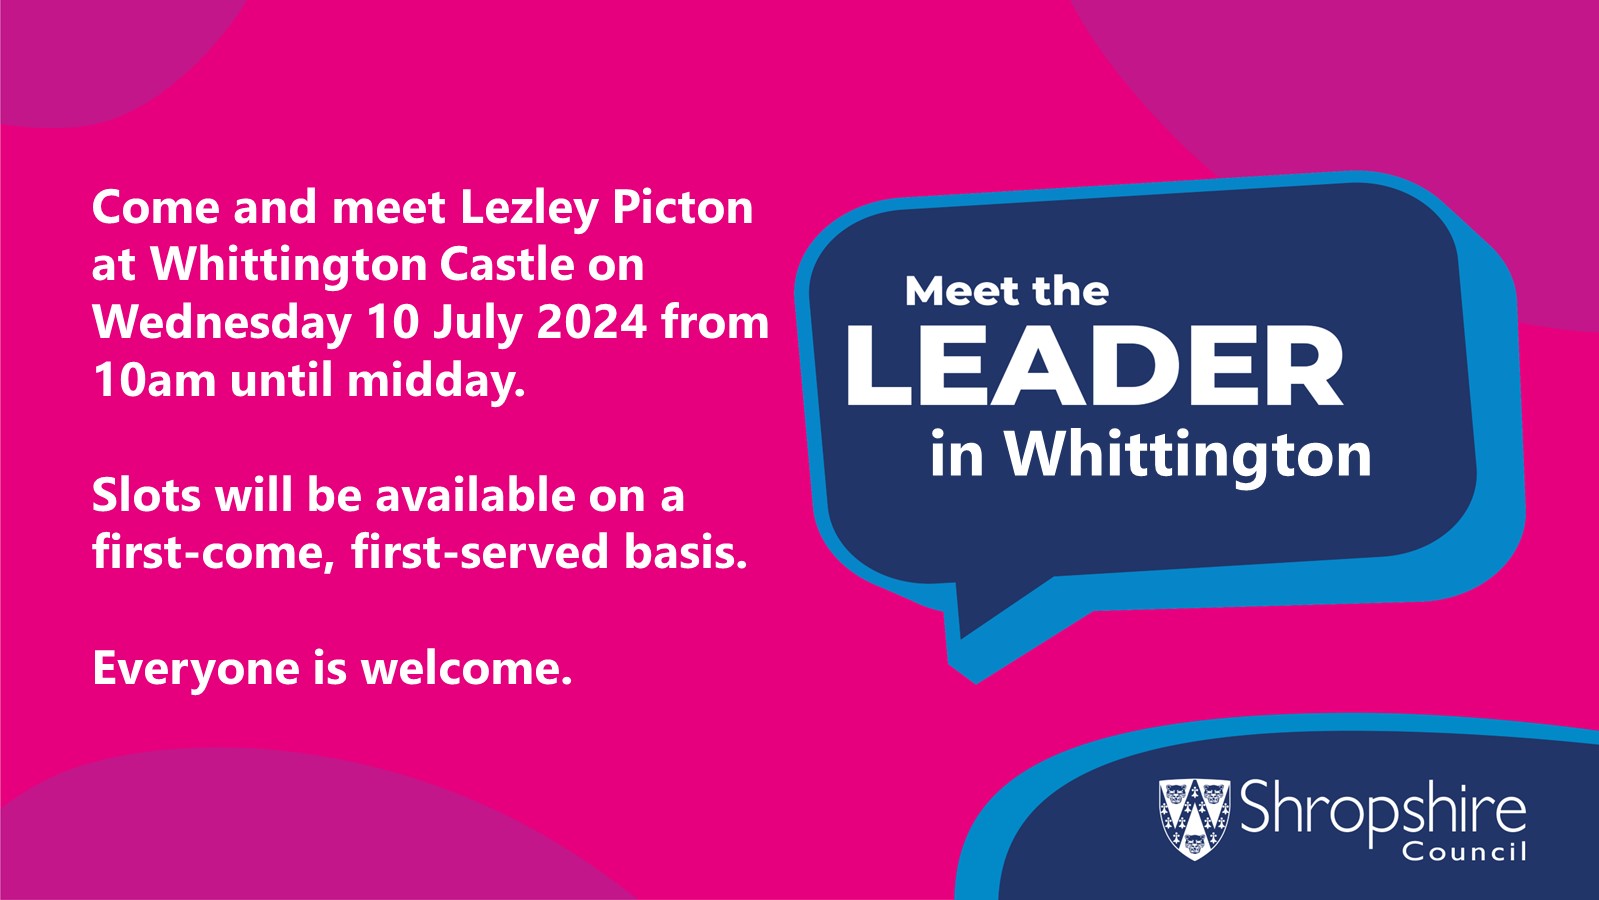 Meet the Leader at Whittington Castle on Wednesday 10 July 2024.